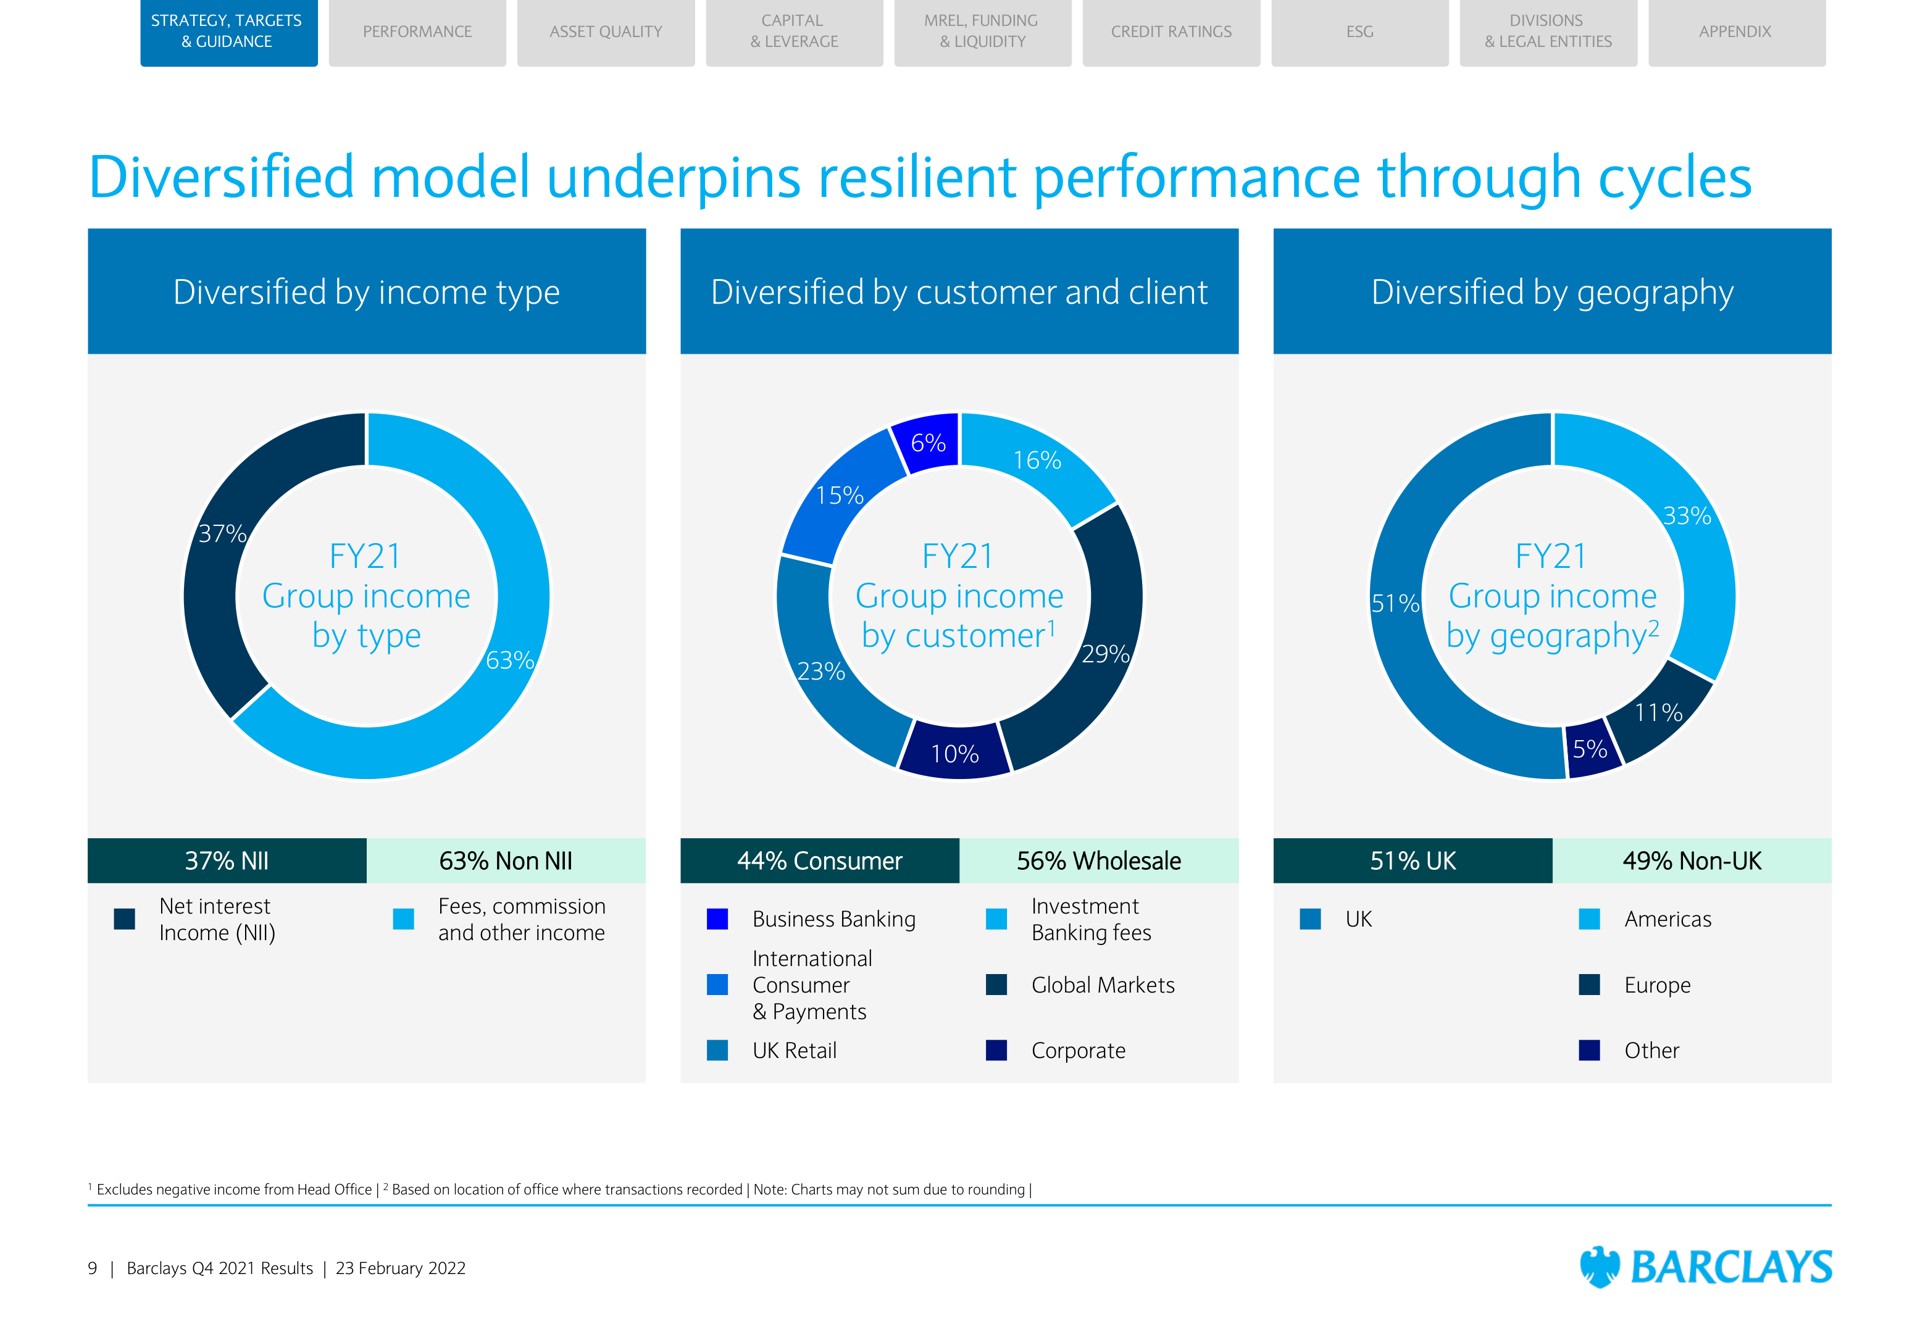 diversified model underpins resilient performance through cycles diversified by income type diversified by customer and client diversified by geography group income by type group income by customer group income by geography non nil wholesale | Barclays